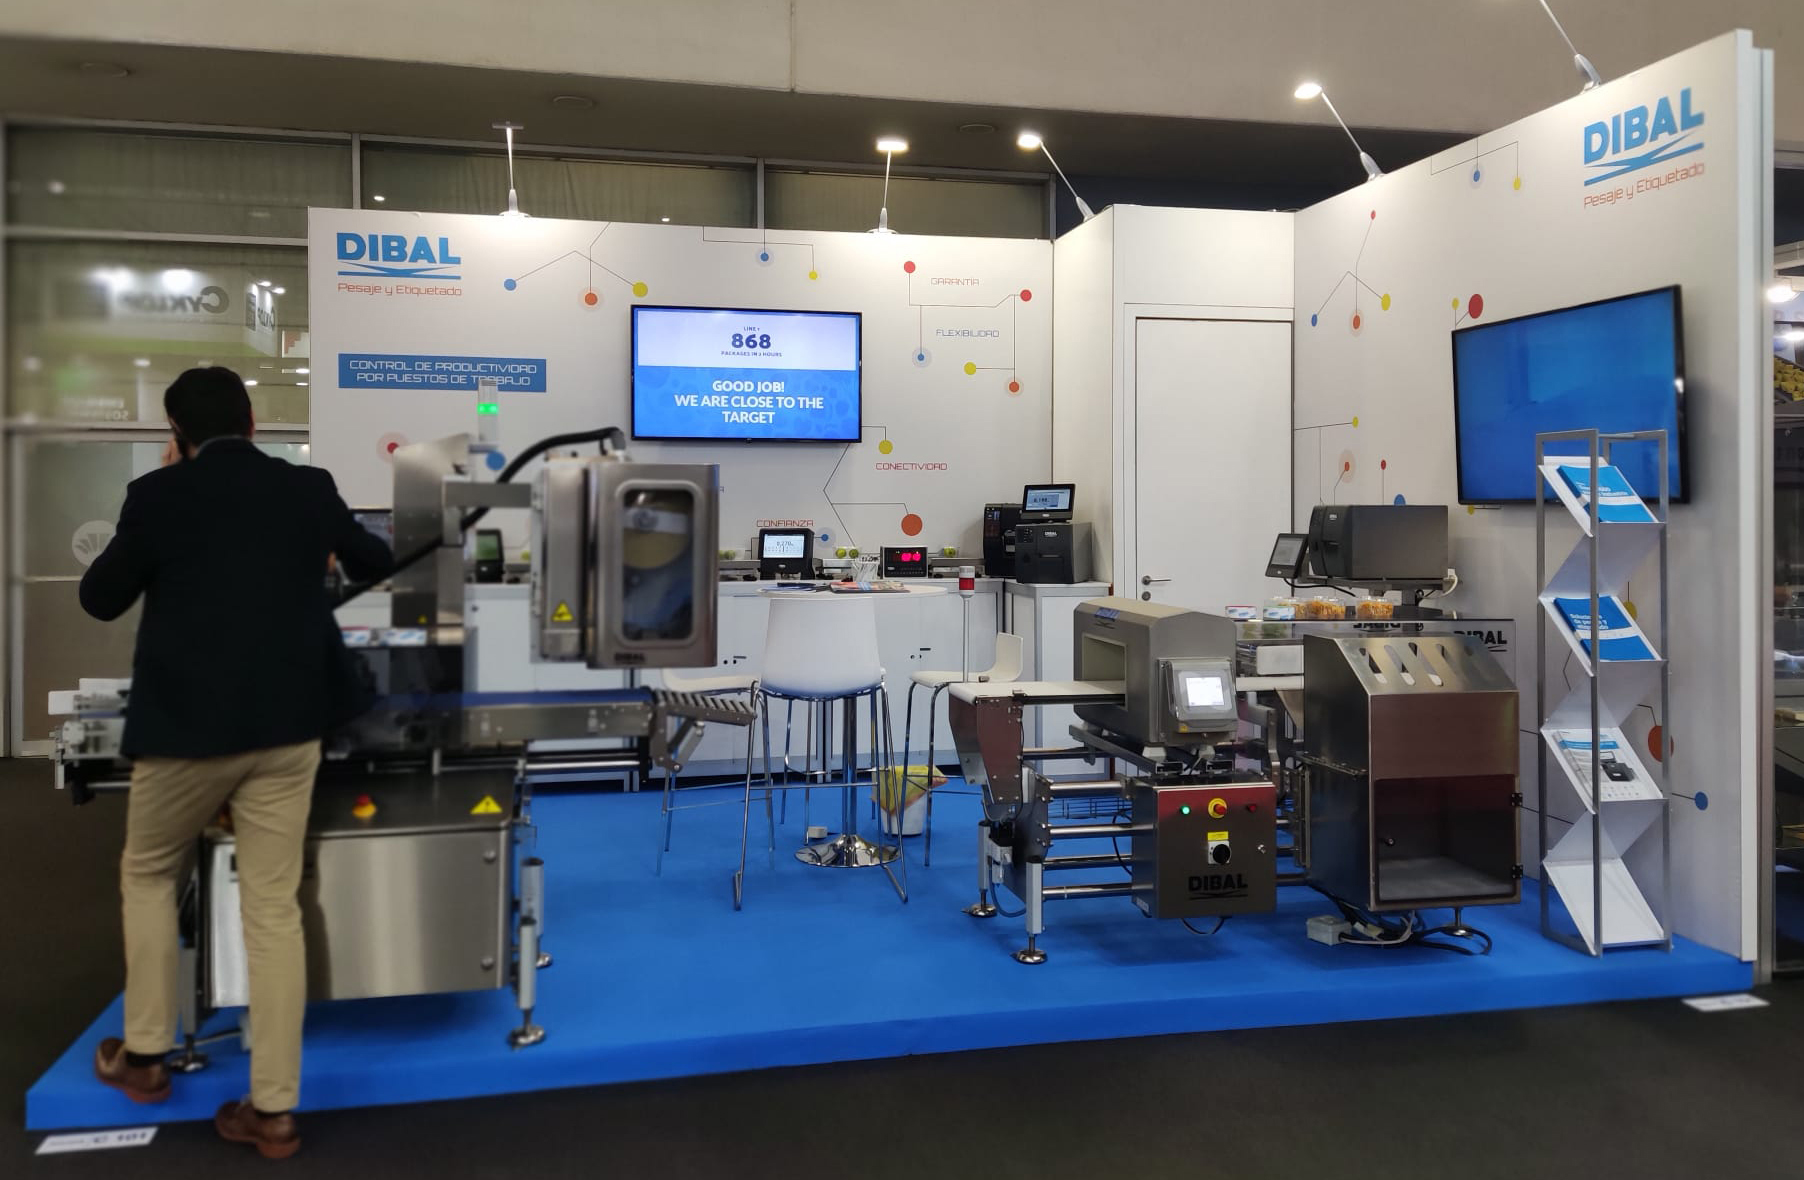 Ready to show you our latest developments in weighing and labelling for the industry